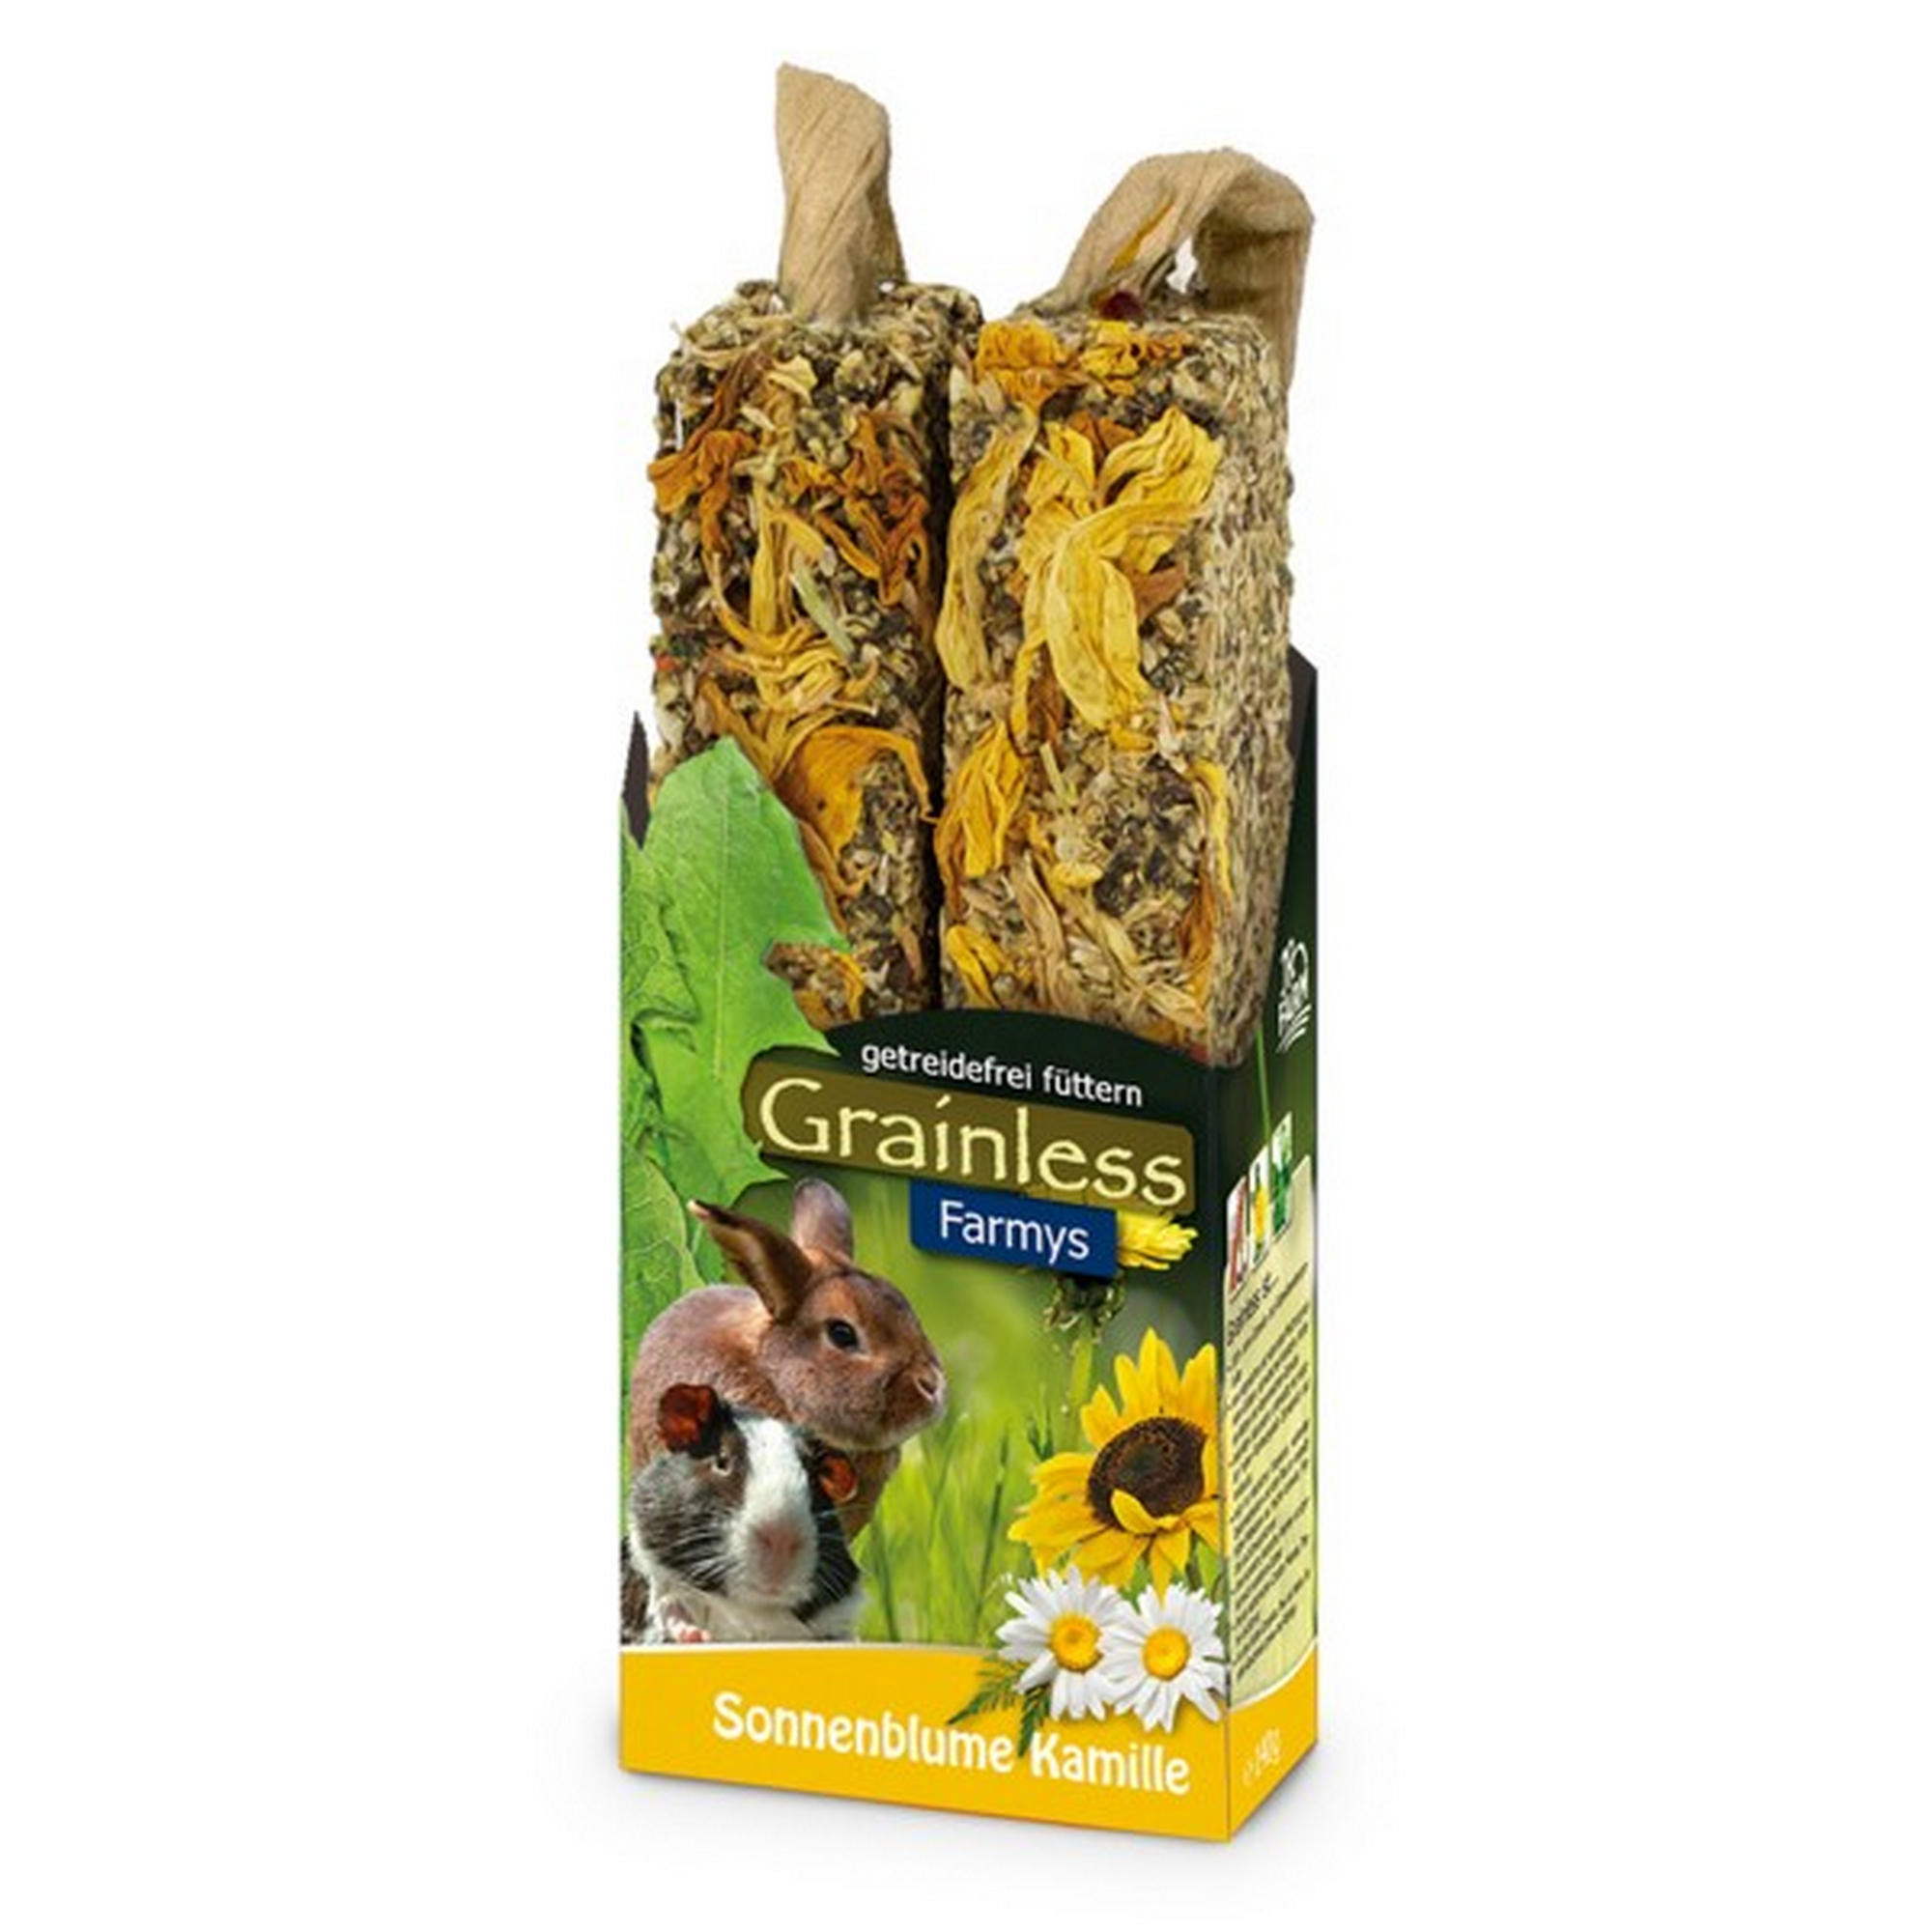 Nagersnack 'Grainless Farmys' Sonnenblume-Kamille 140 g + product picture